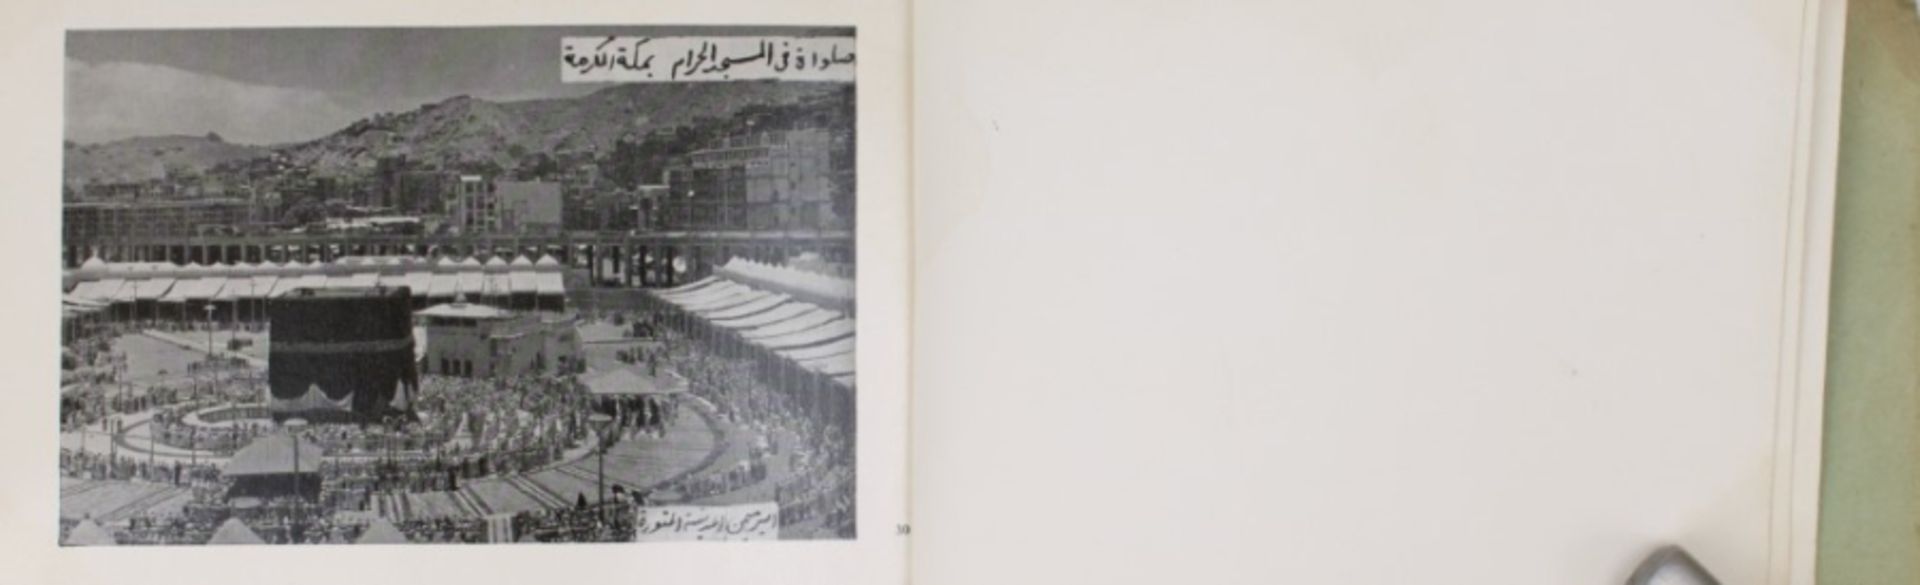 1930 Album with photographs of Mecca - Image 10 of 24